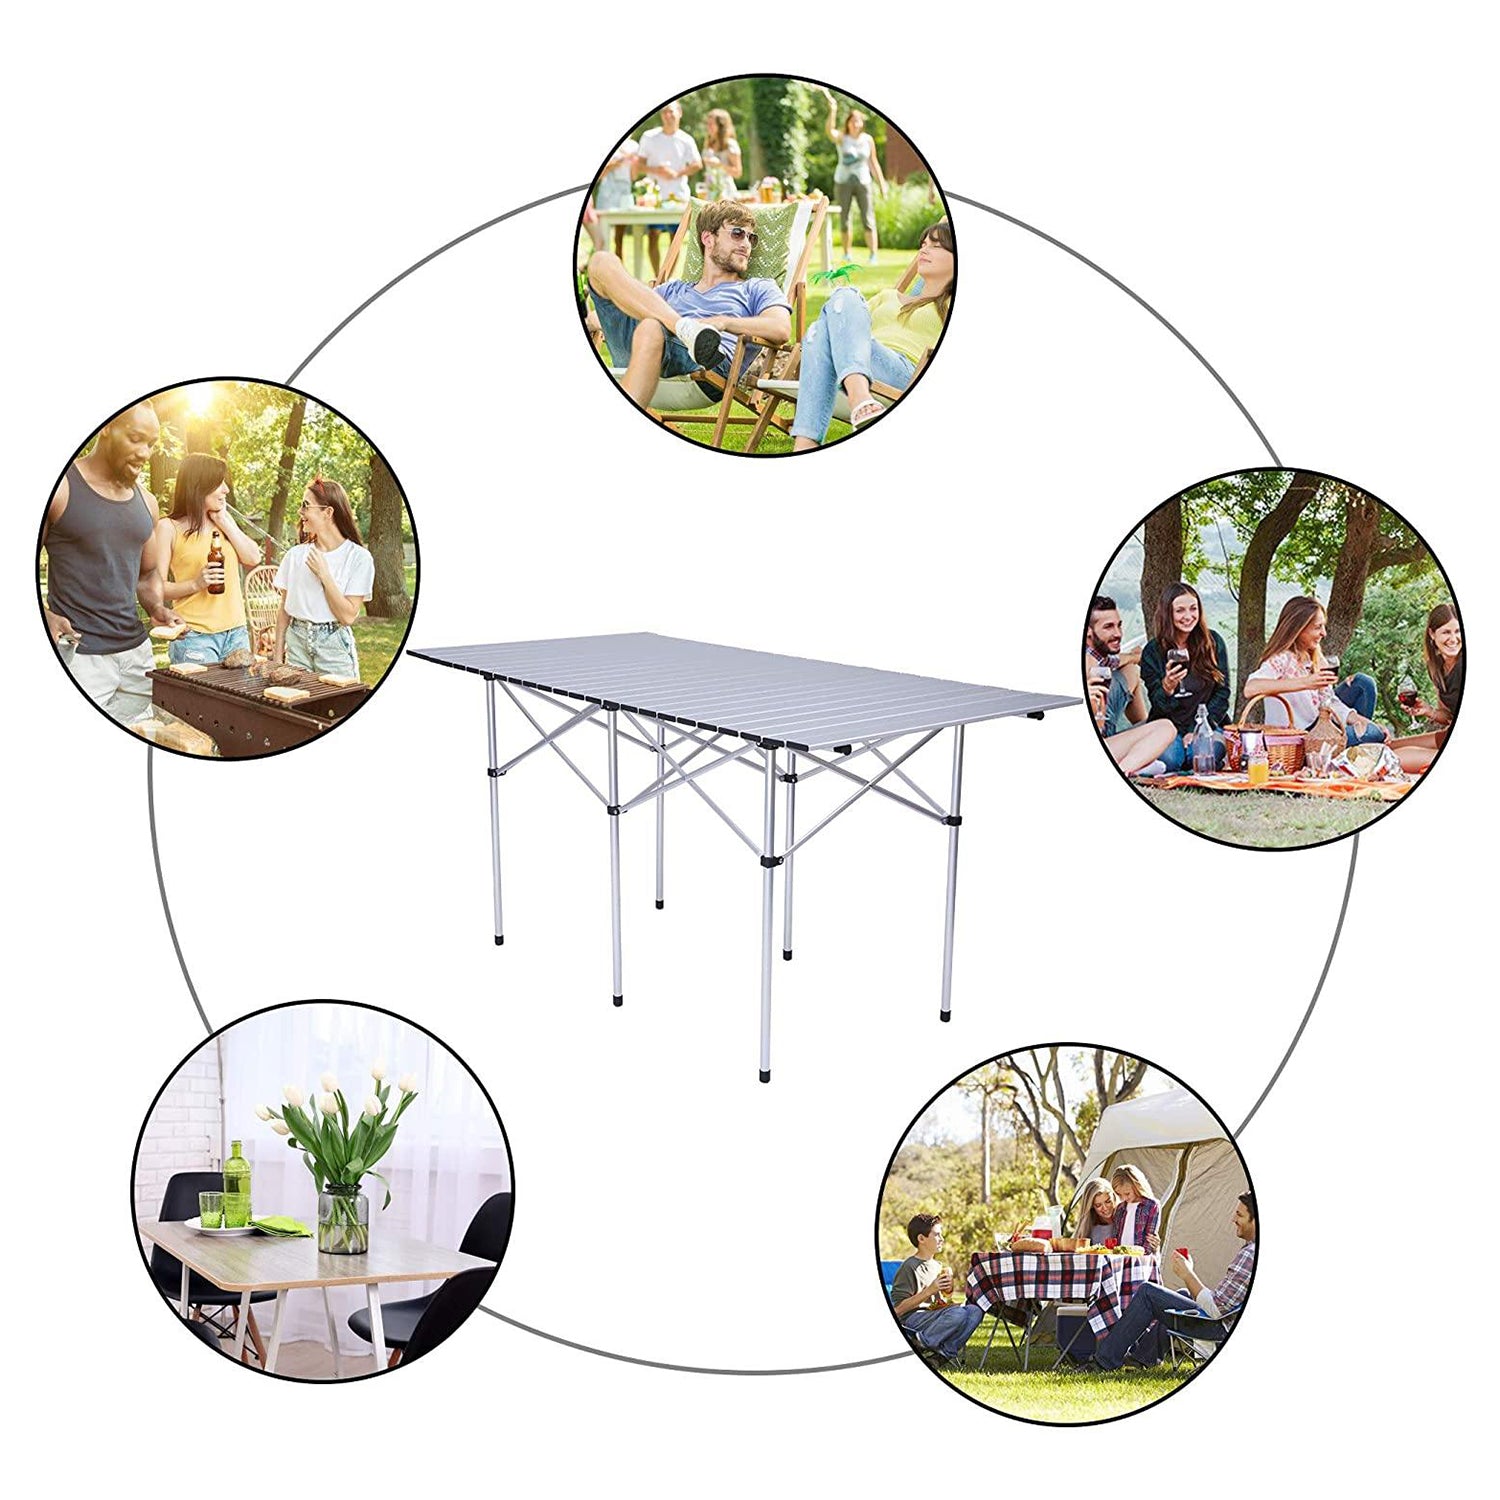 Portable Folding Lightweight Aluminum Camping Picnic Table, Compact Roll Top Table with Carry Bag